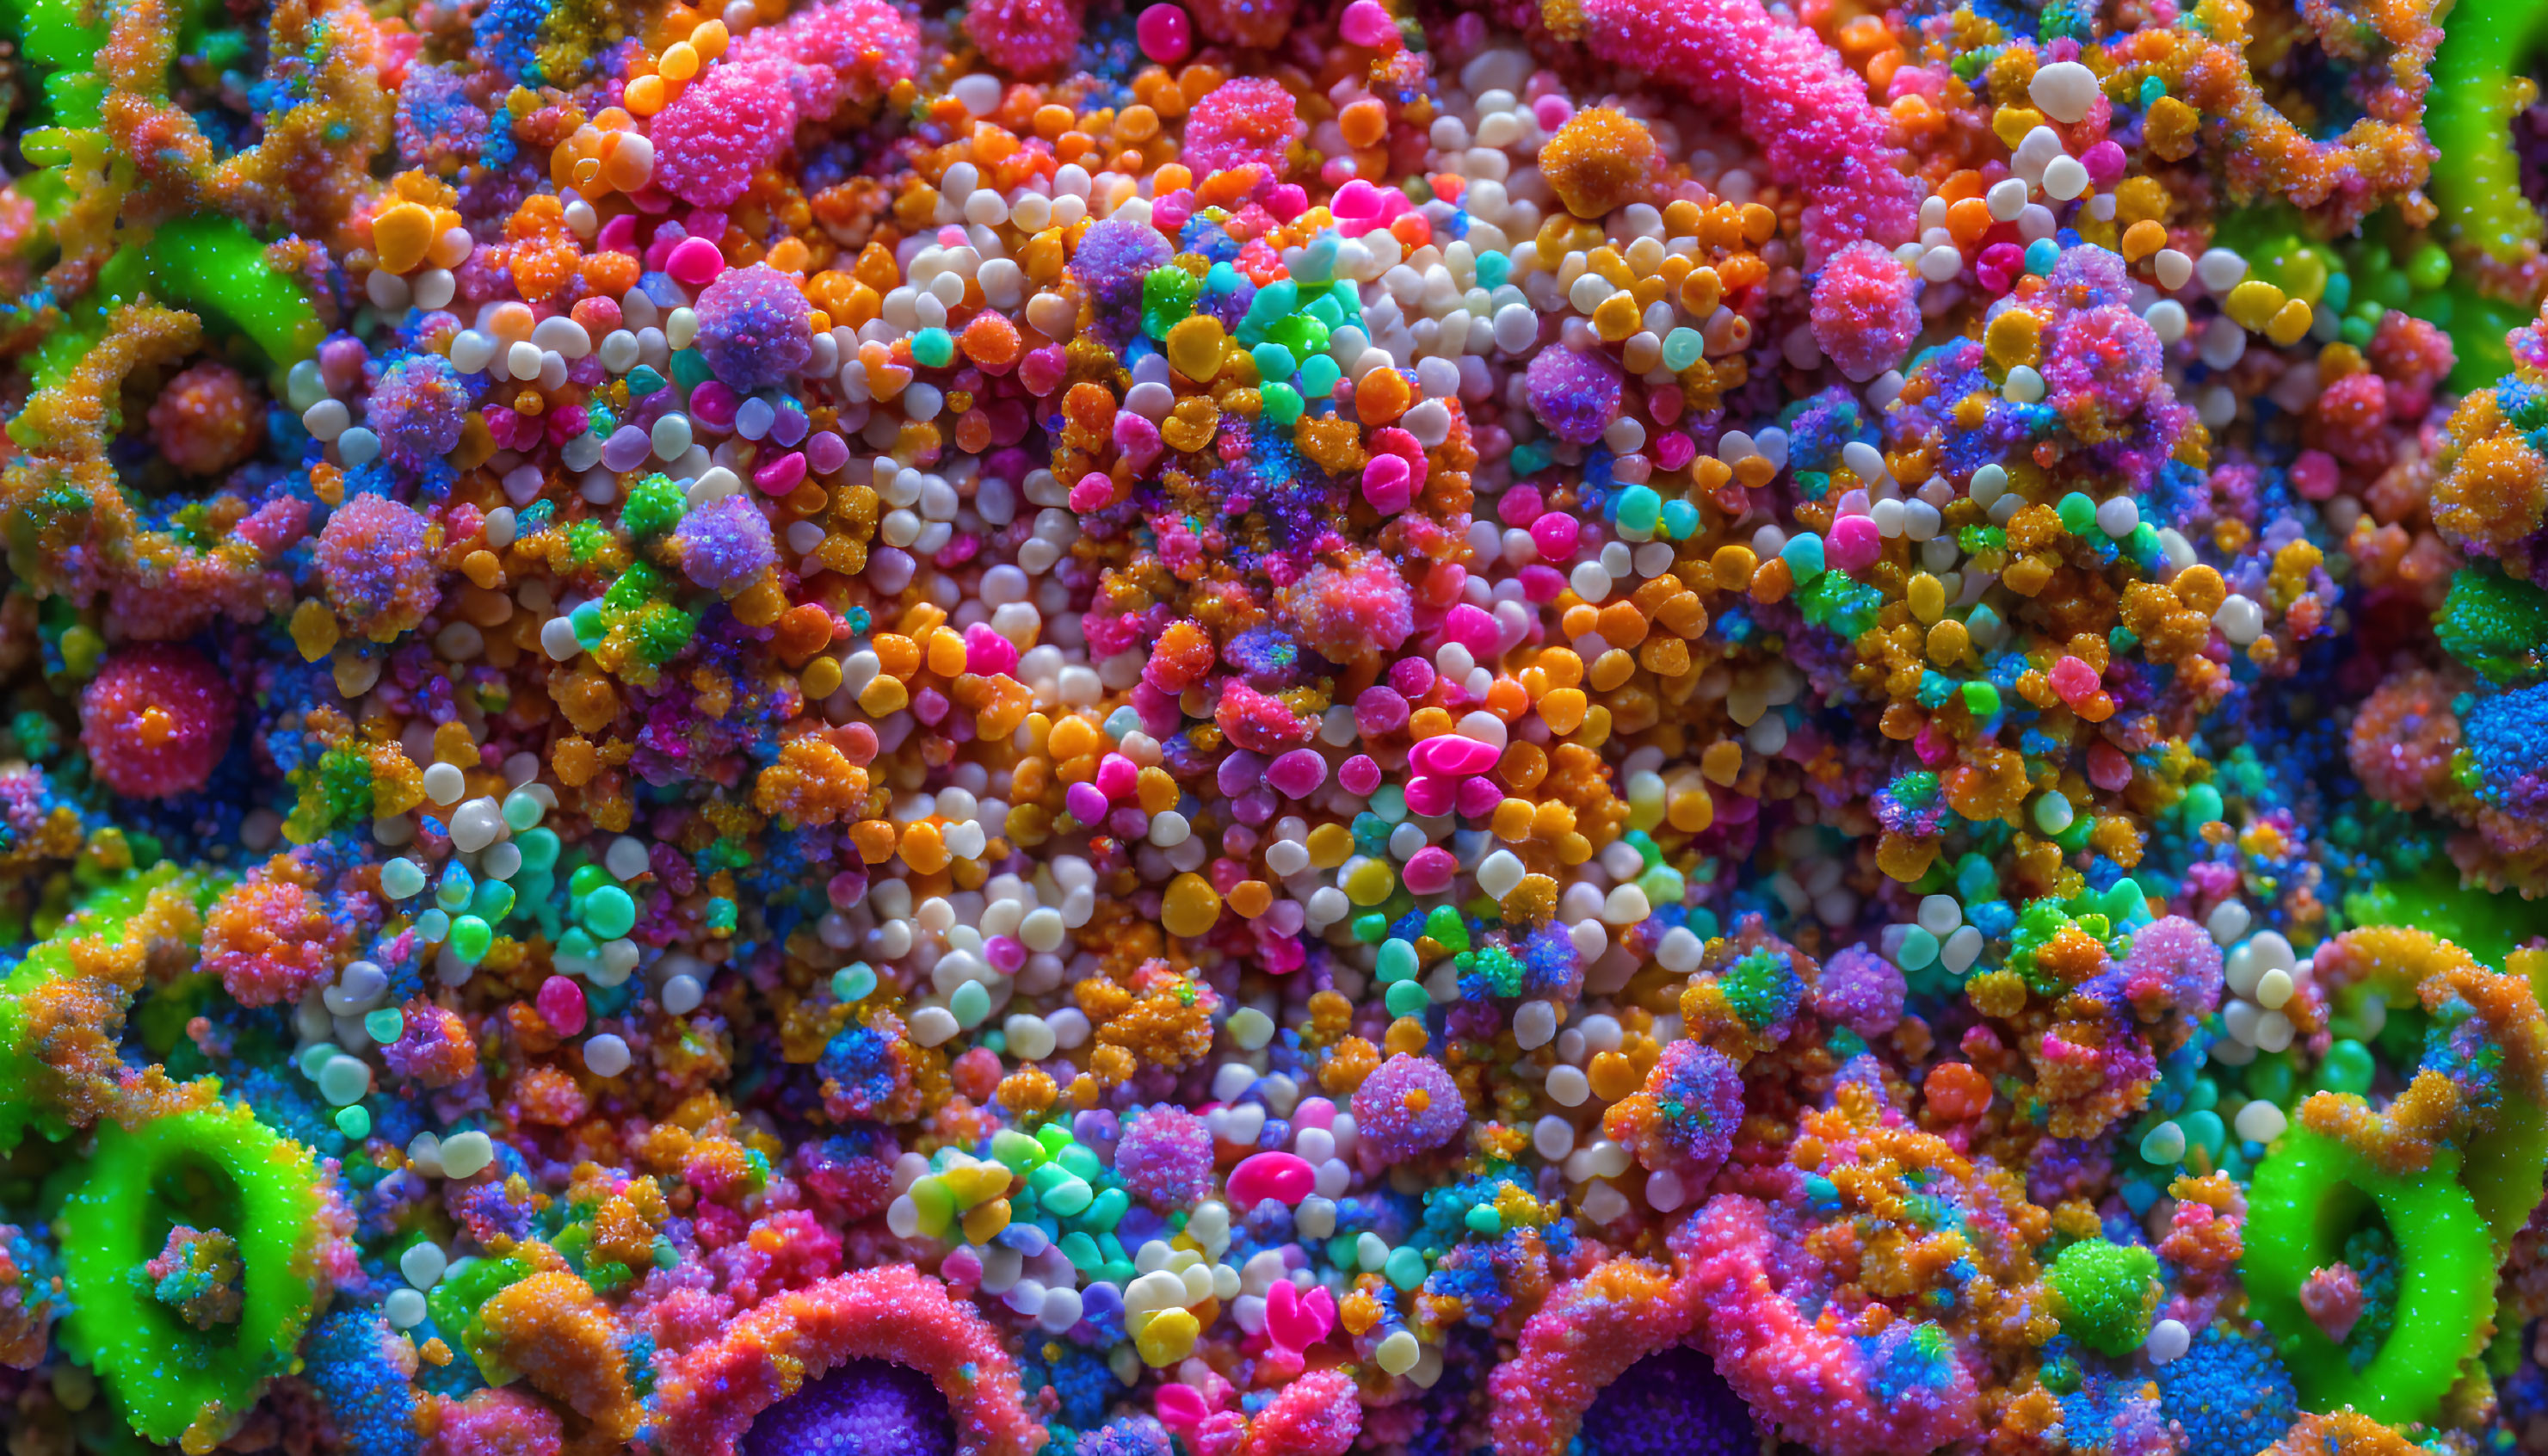 Colorful Sprinkles Close-Up: Vibrant Mix of Sizes and Shapes